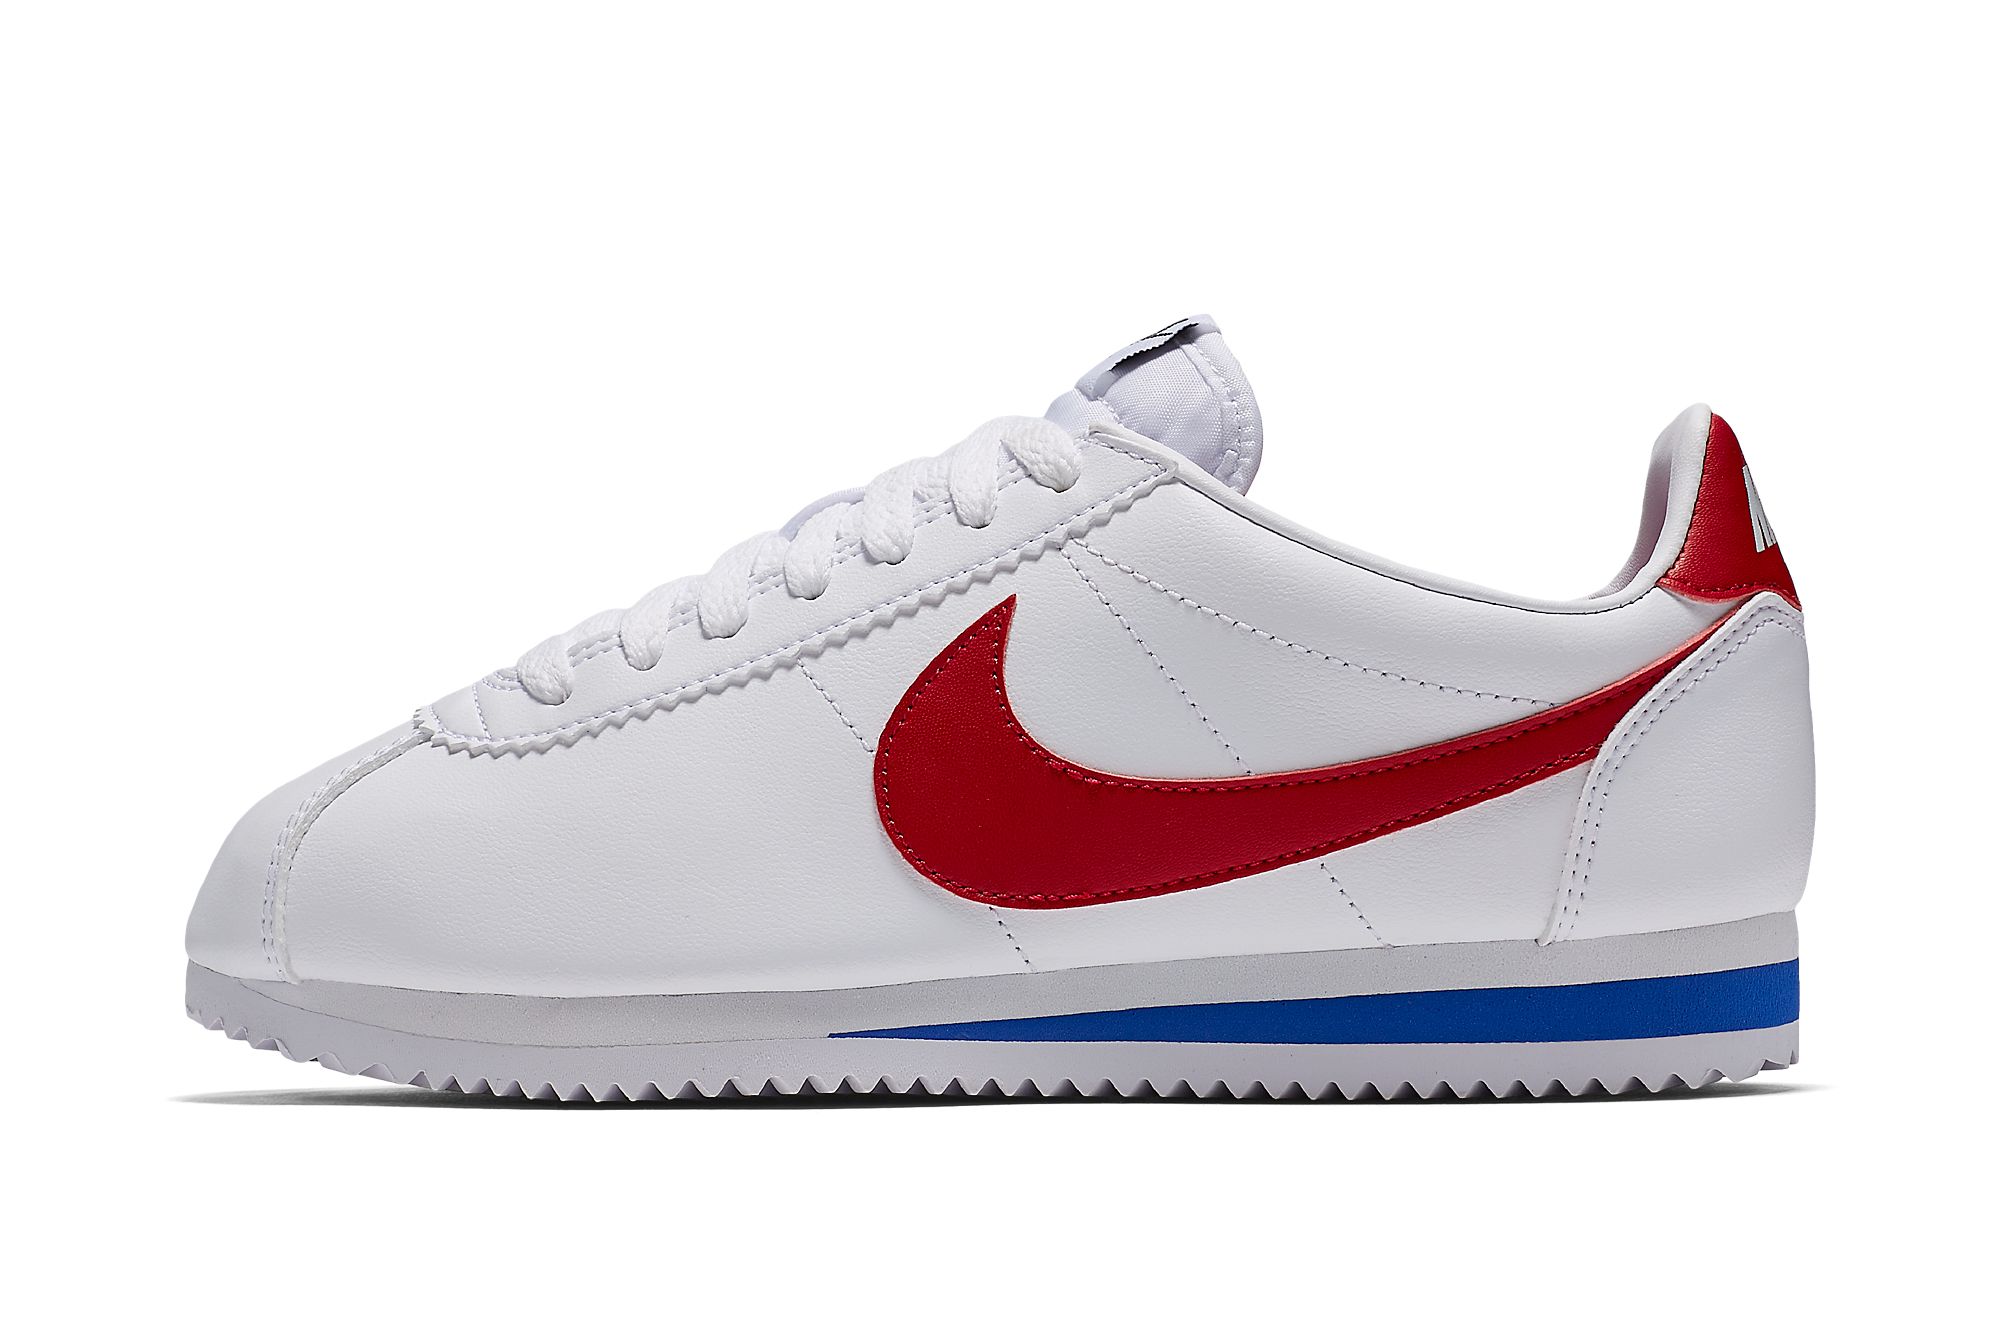 Nike Bring Back The Cortez Women's In Red, White and Blue - Freaker